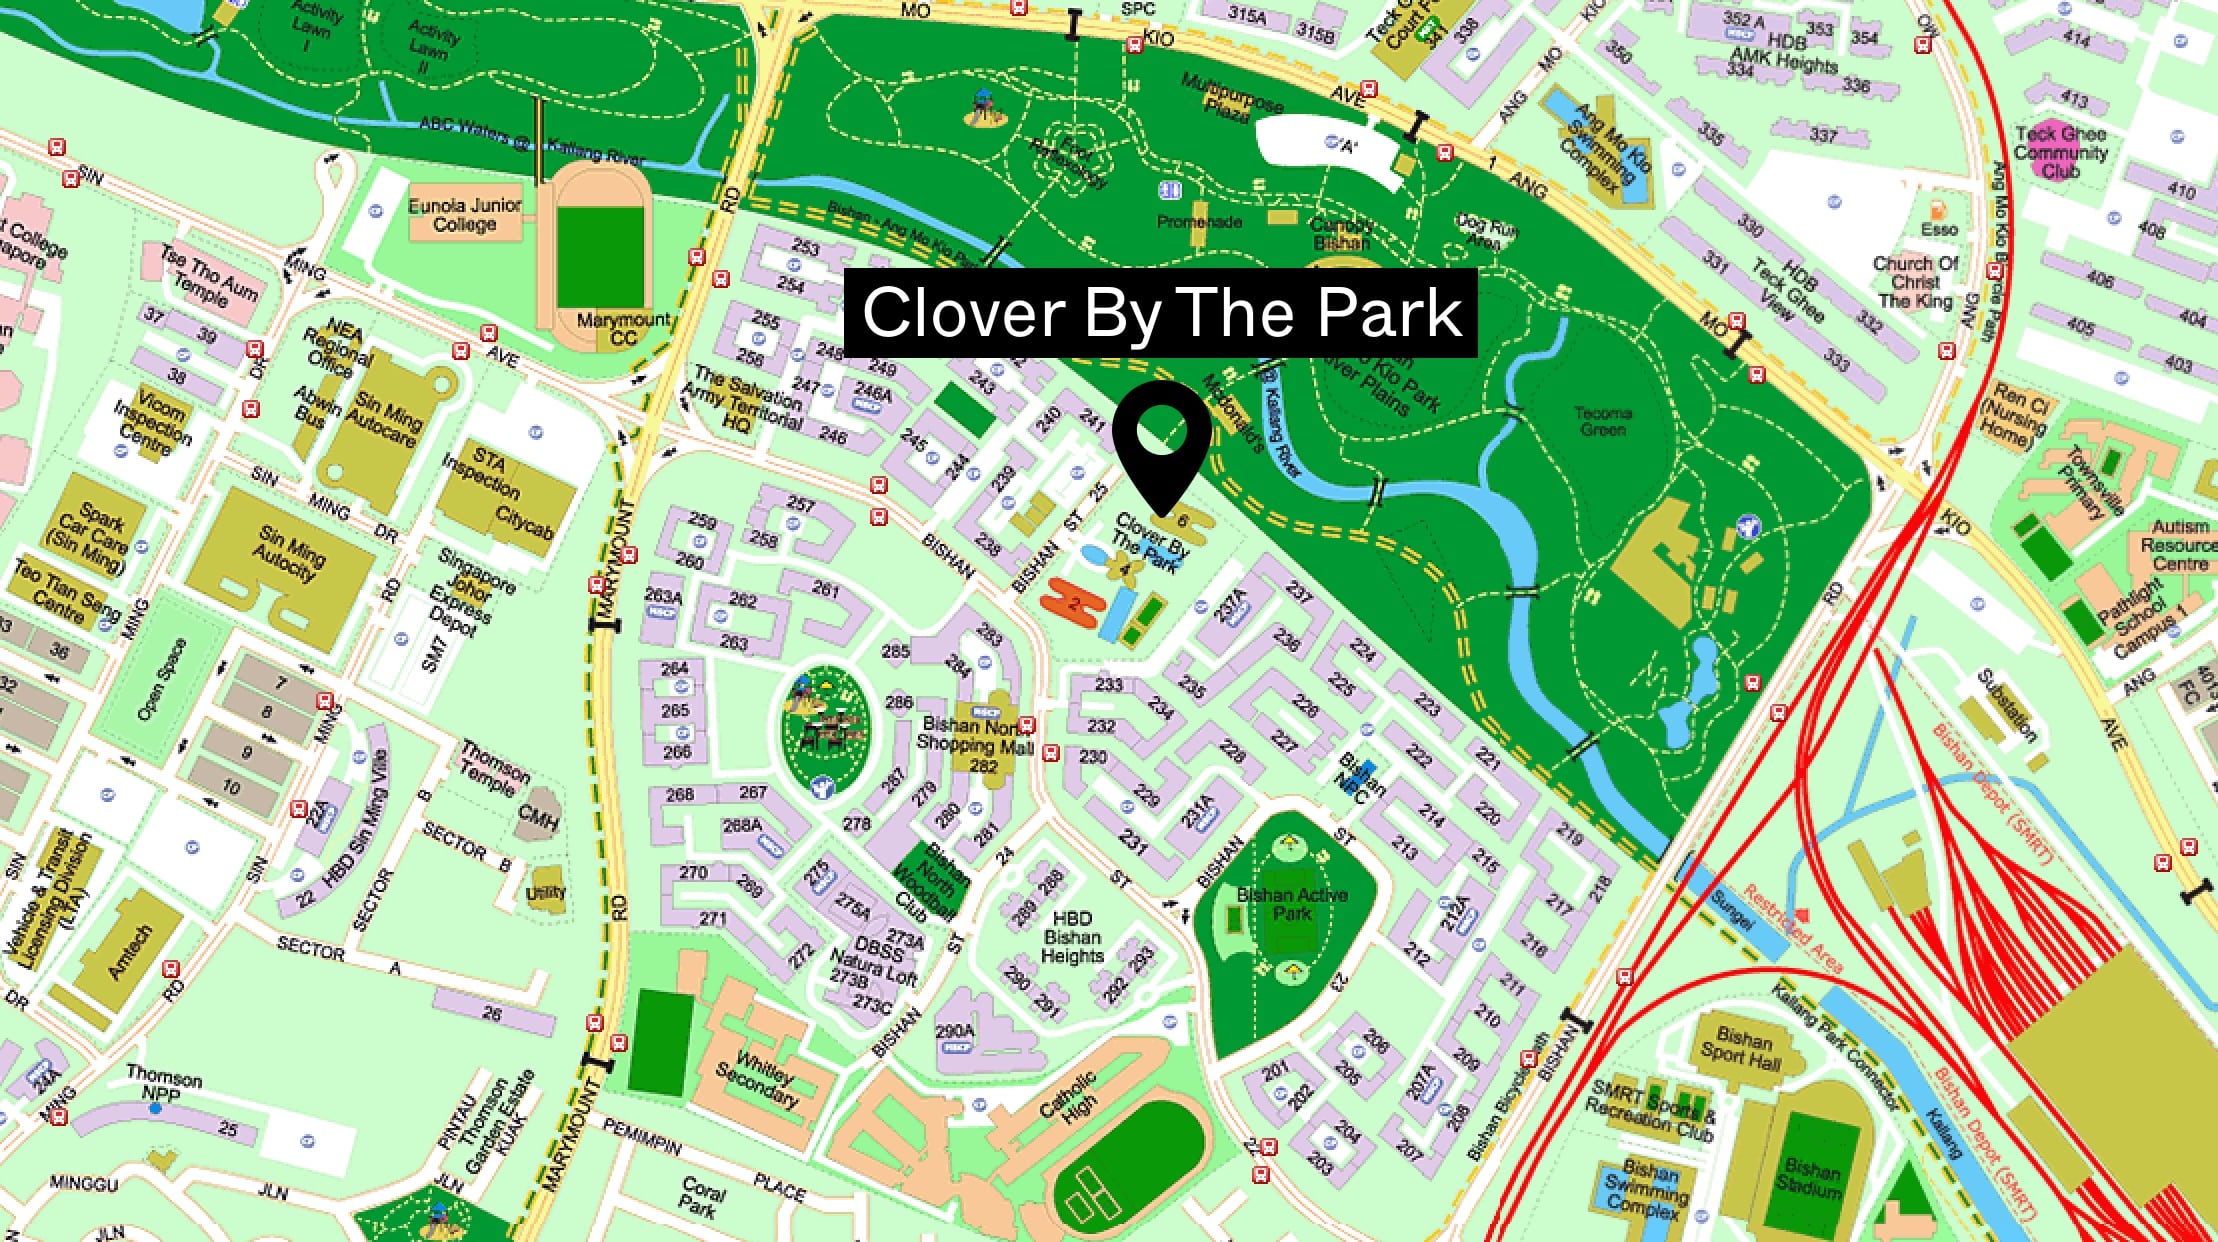 Clover By The Park